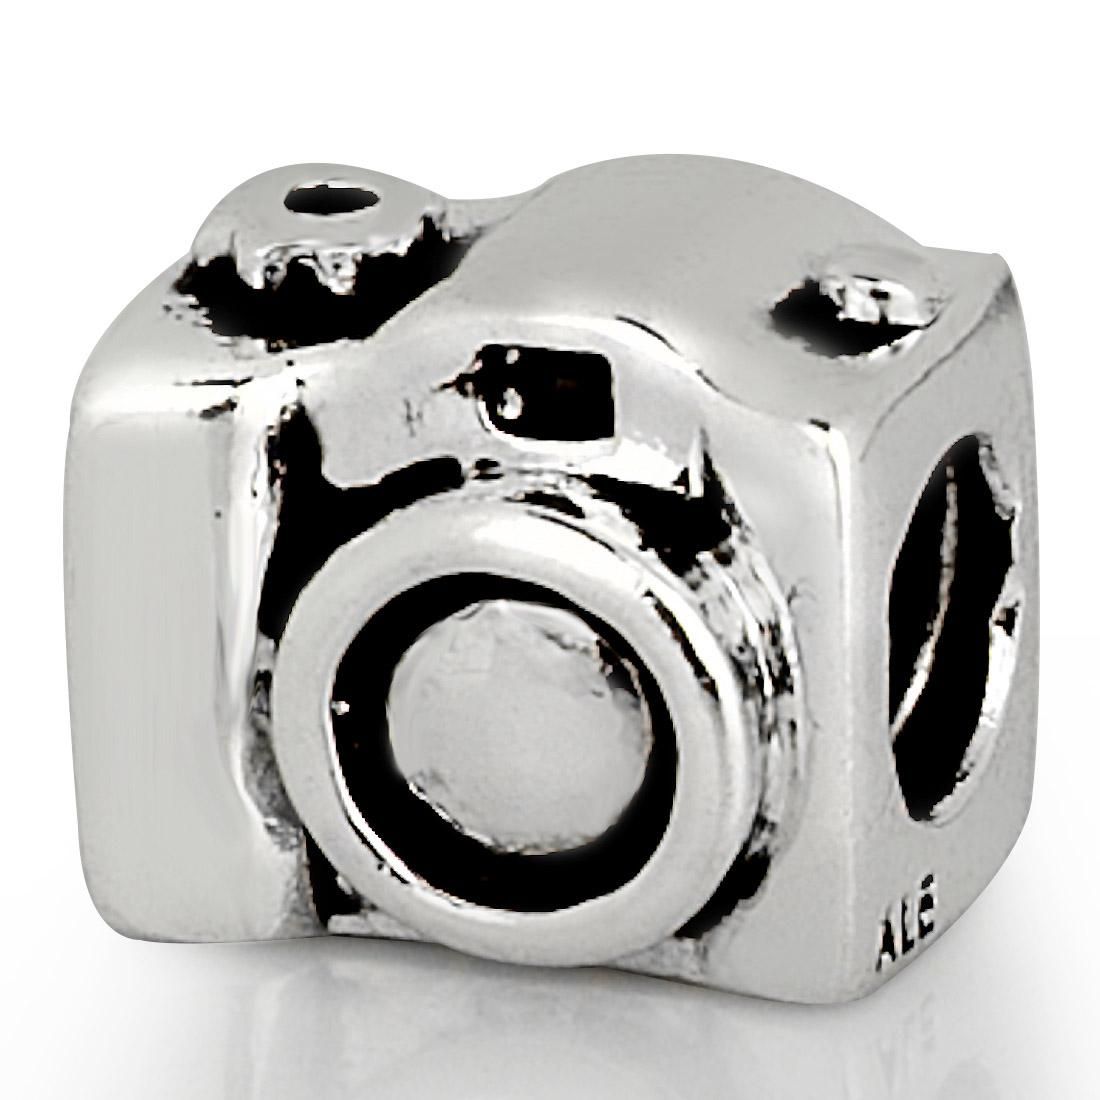 2019 Wholesale Camera Charm 925 Sterling Silver European Charms Bead For Pandora Women Jewelry ...